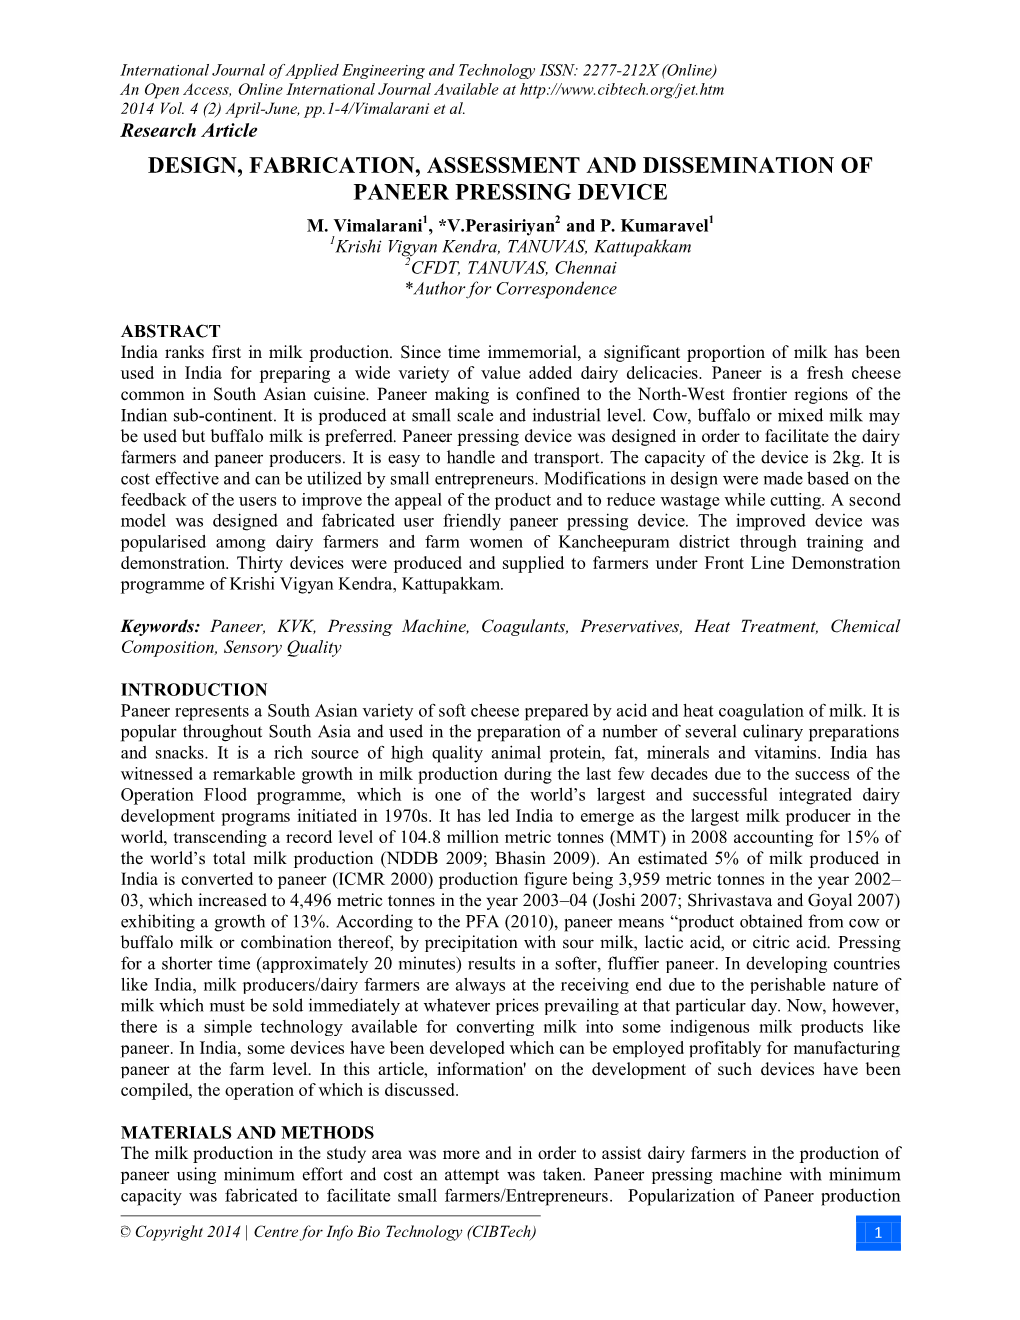 Design, Fabrication, Assessment and Dissemination of Paneer Pressing Device M